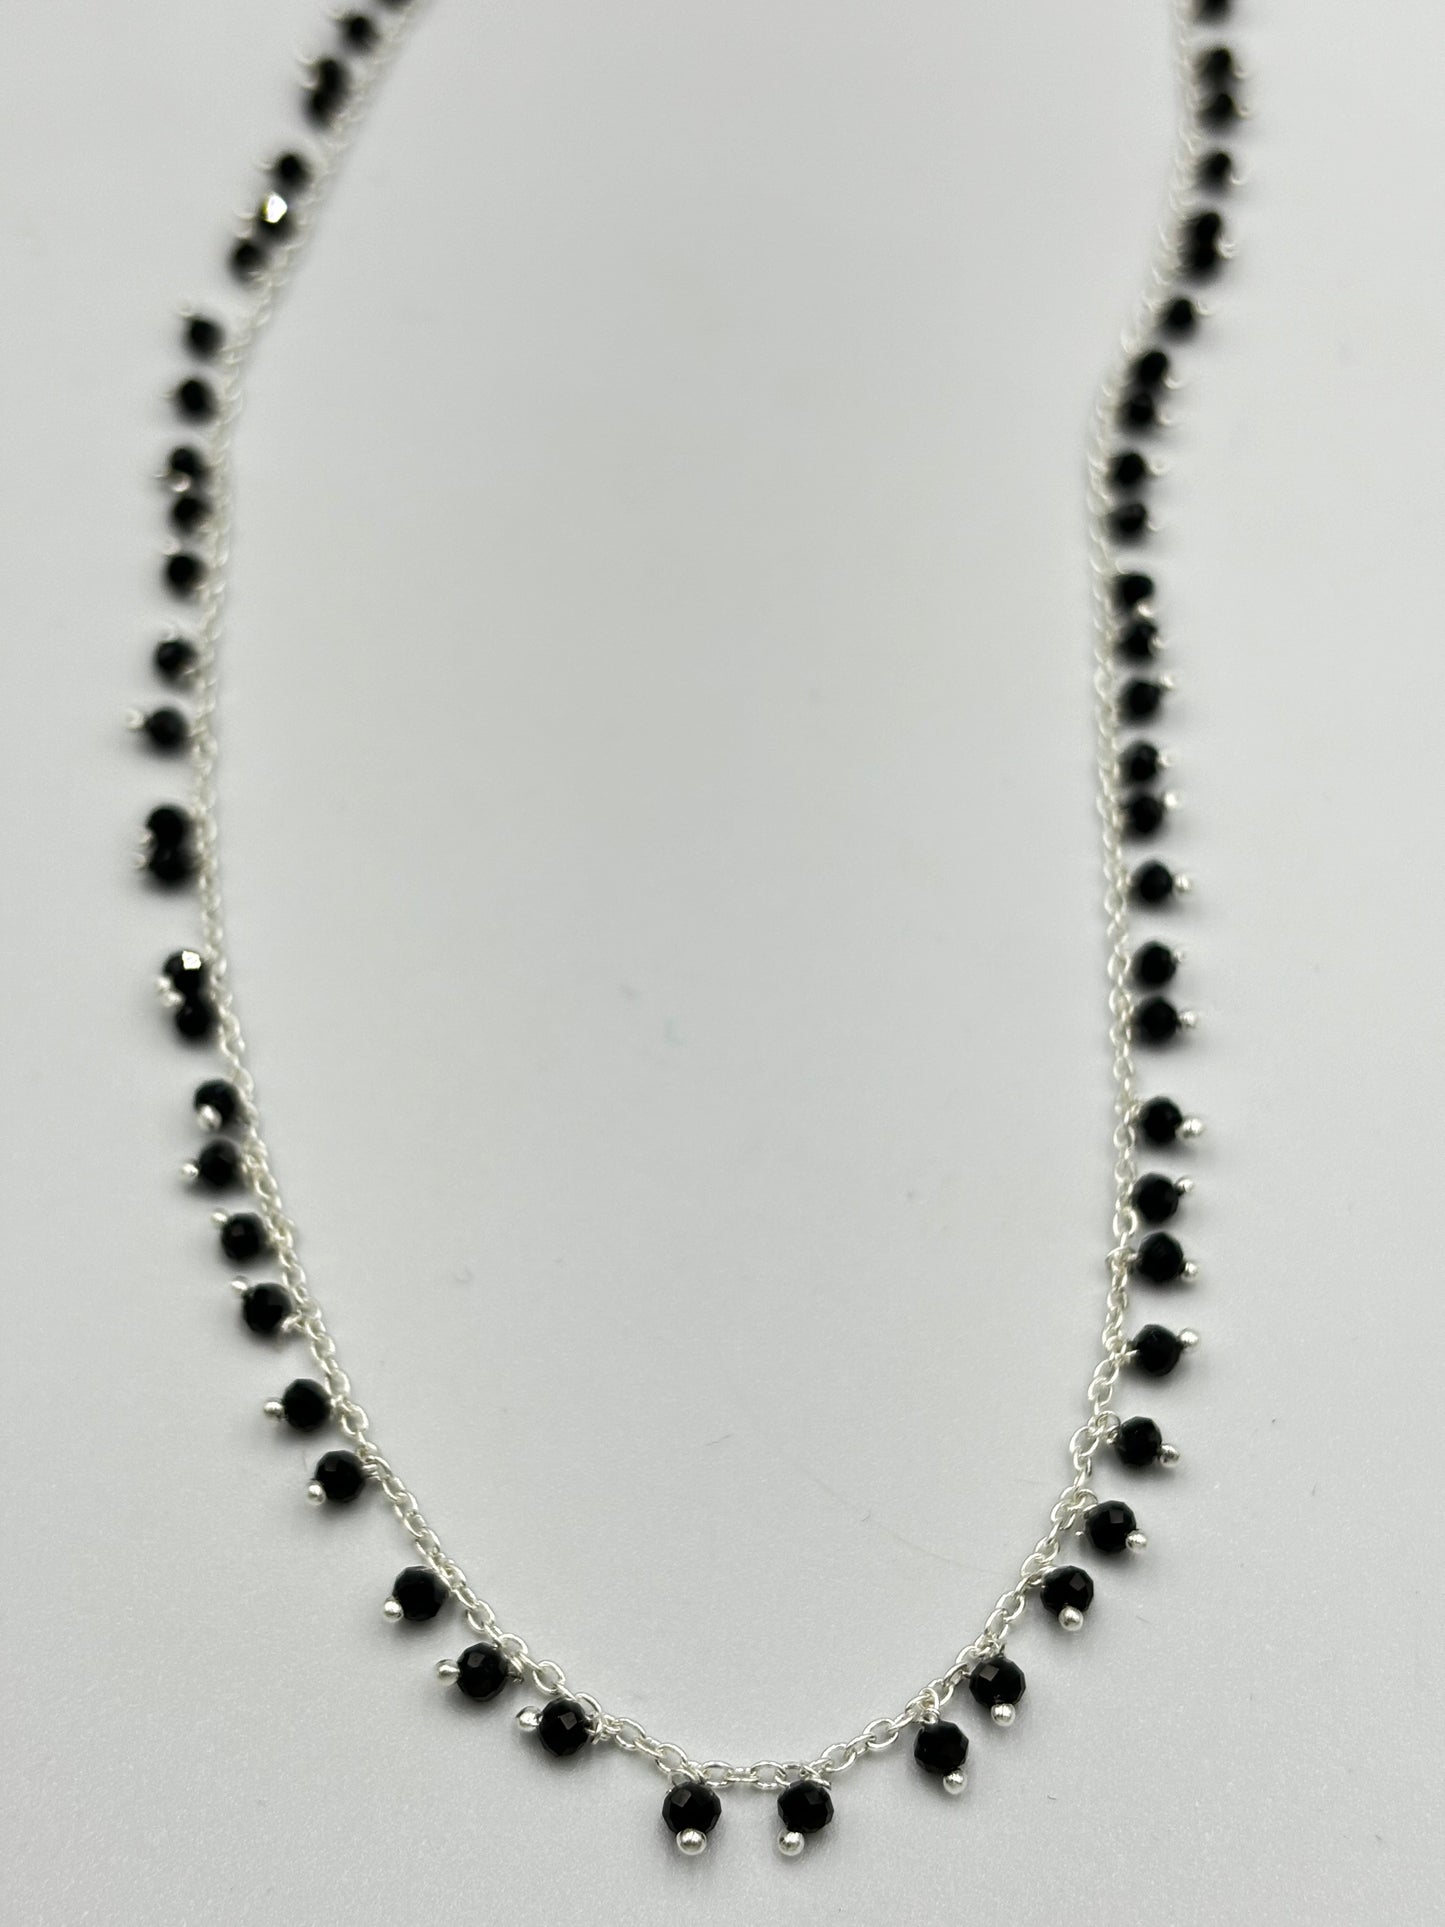 Sterling silver necklace with lots of dangling black spinal semi precious stones